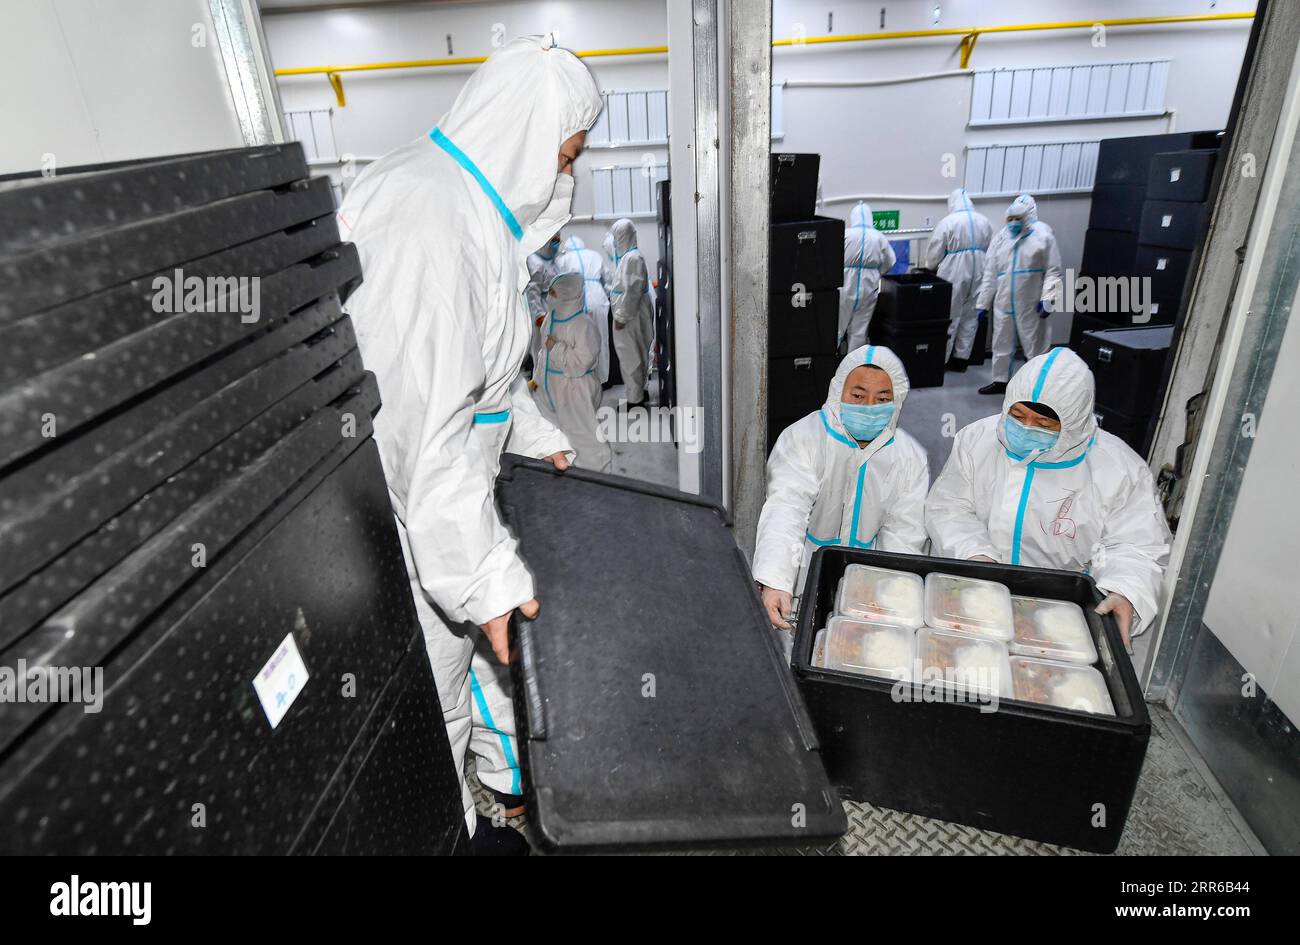 210203 -- TONGHUA, Feb. 3, 2021 -- Distribution workers load boxed meals onto a truck in Jiahe Catering Company in Tonghua City of northeast China s Jilin Province, Jan. 21, 2021. The city is slowing down to curb the pandemic, but we re not closing up. Instead, we re busier than ever, said Zhao Hongxia, general manager of Jiahe Catering Company. The company was originally a boxed meal supplier for primary and secondary schools in Tonghua City. Since the COVID-19 outbreak in Tonghua, the company has accepted a new task of providing meals to front-line staff and people under quarantine. More tha Stock Photo